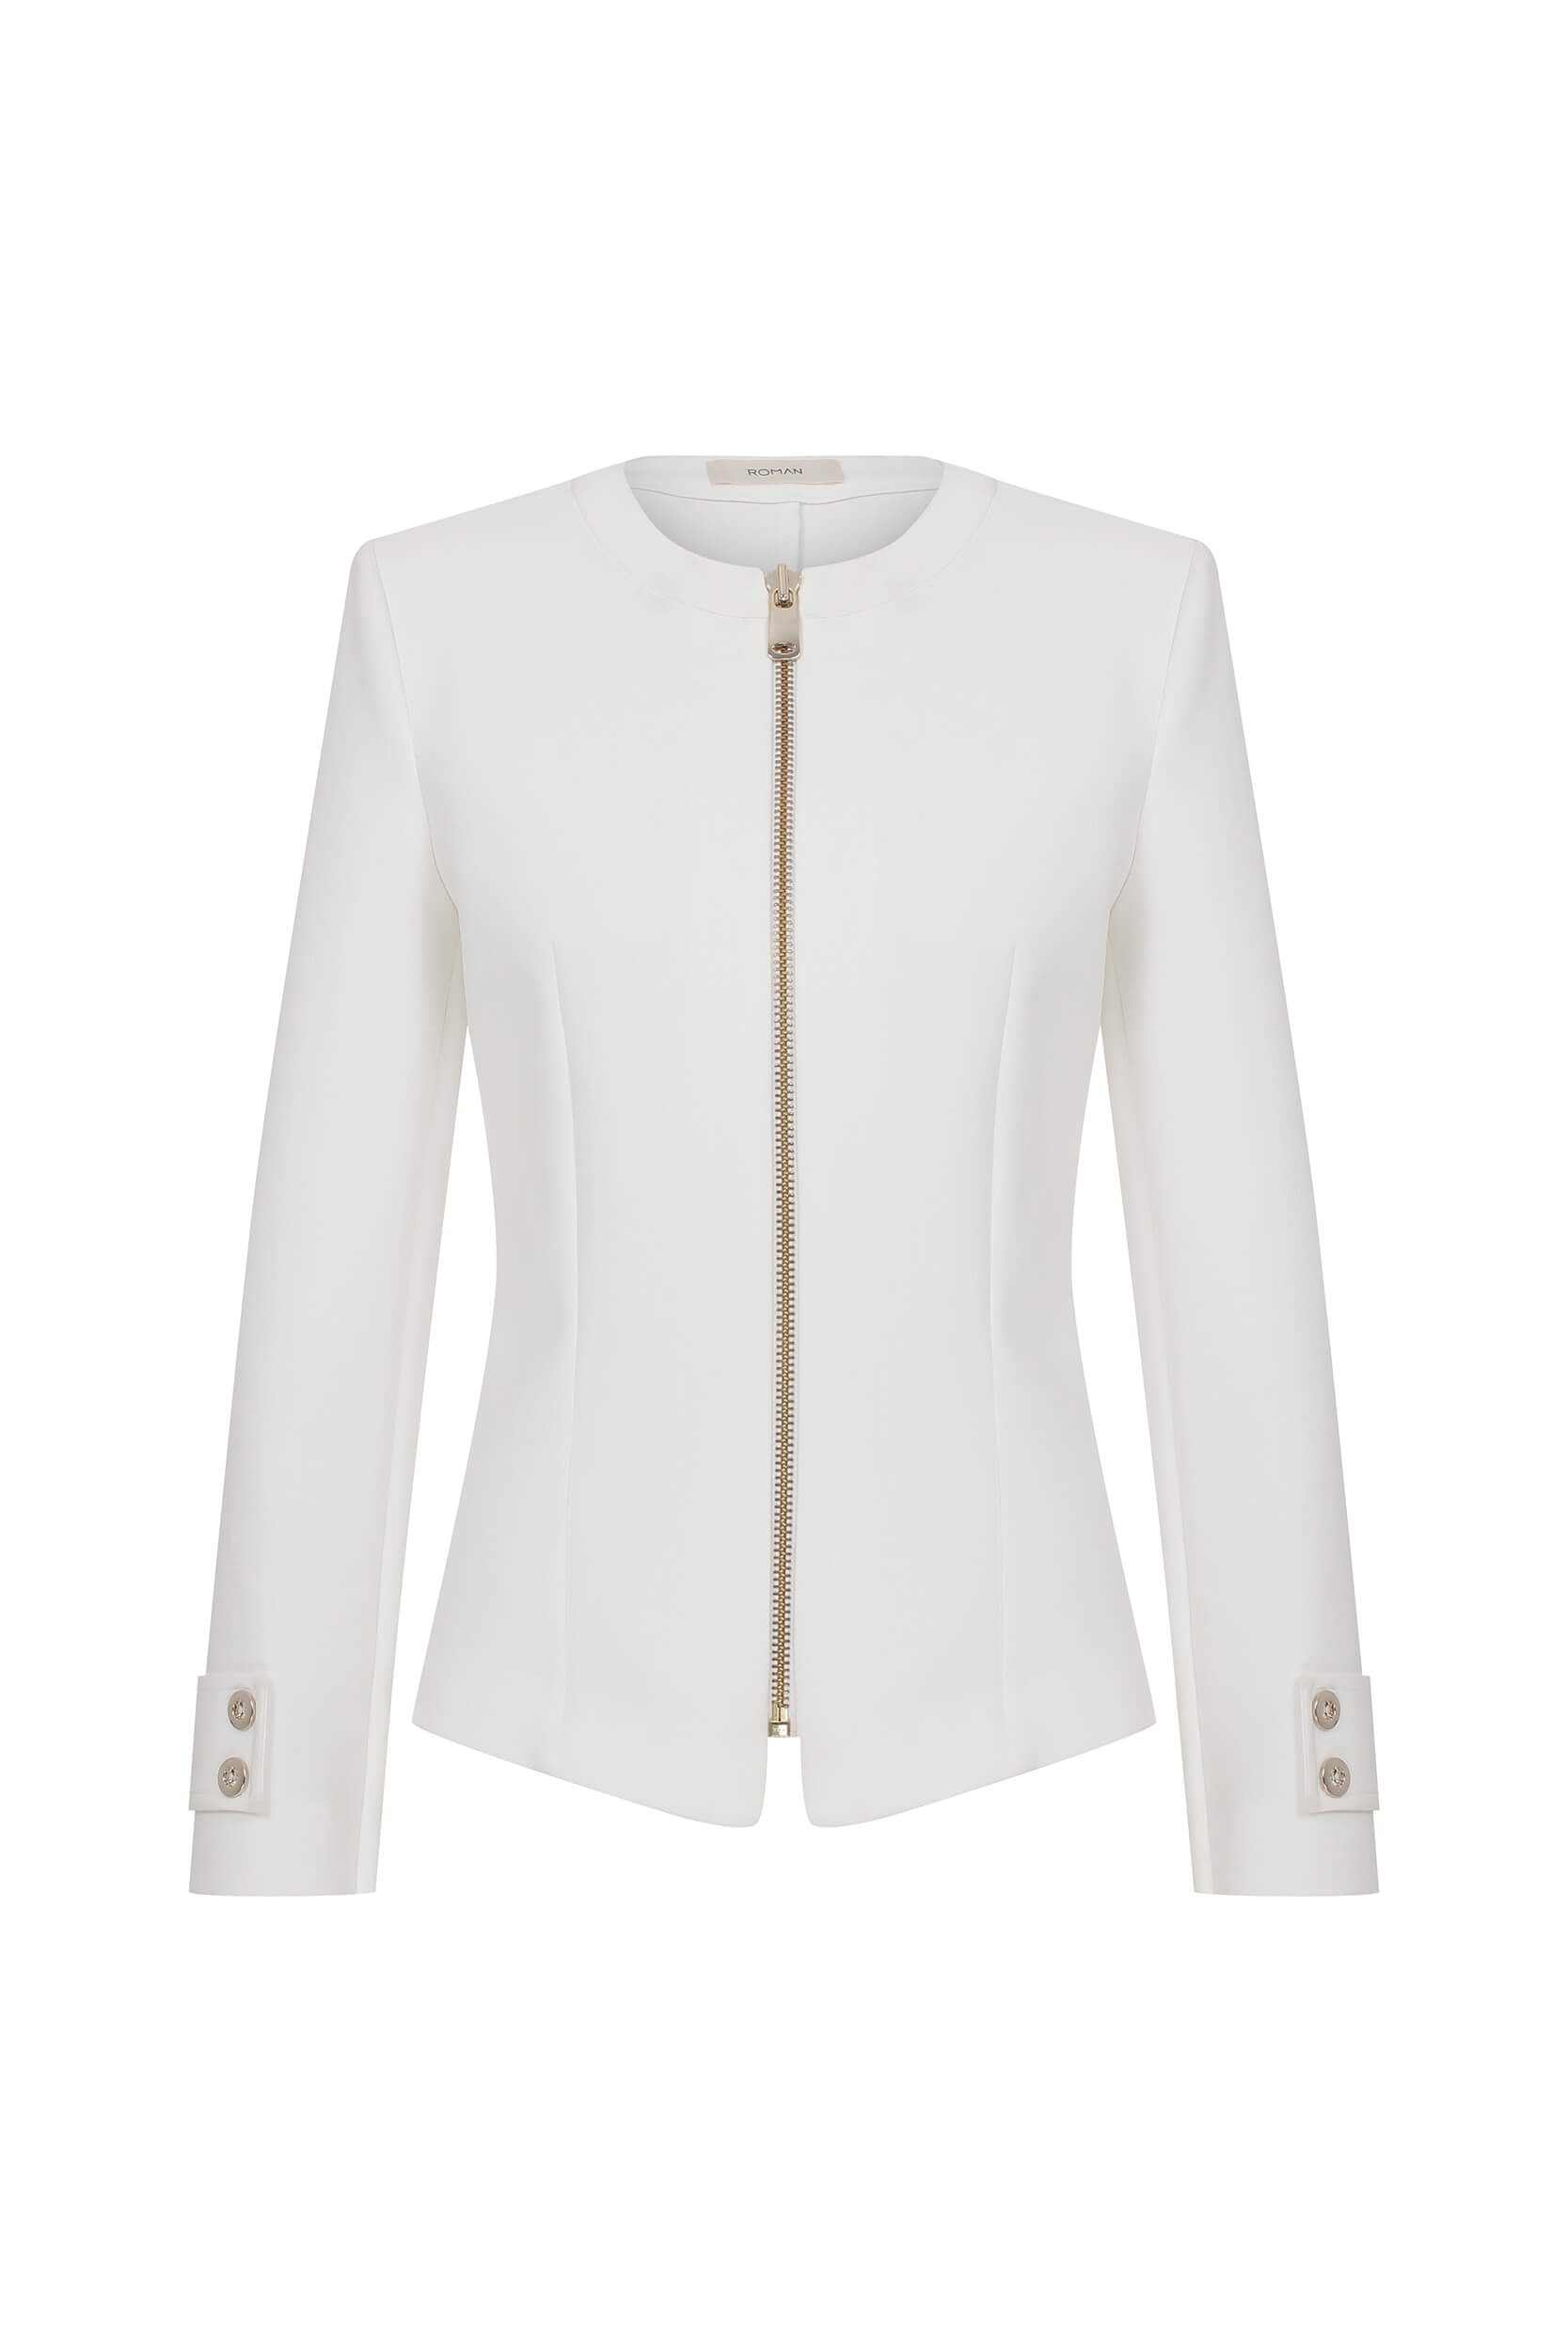 Gold Zipper Detailed Jacket | Shop Sophisticated Women's Clothing